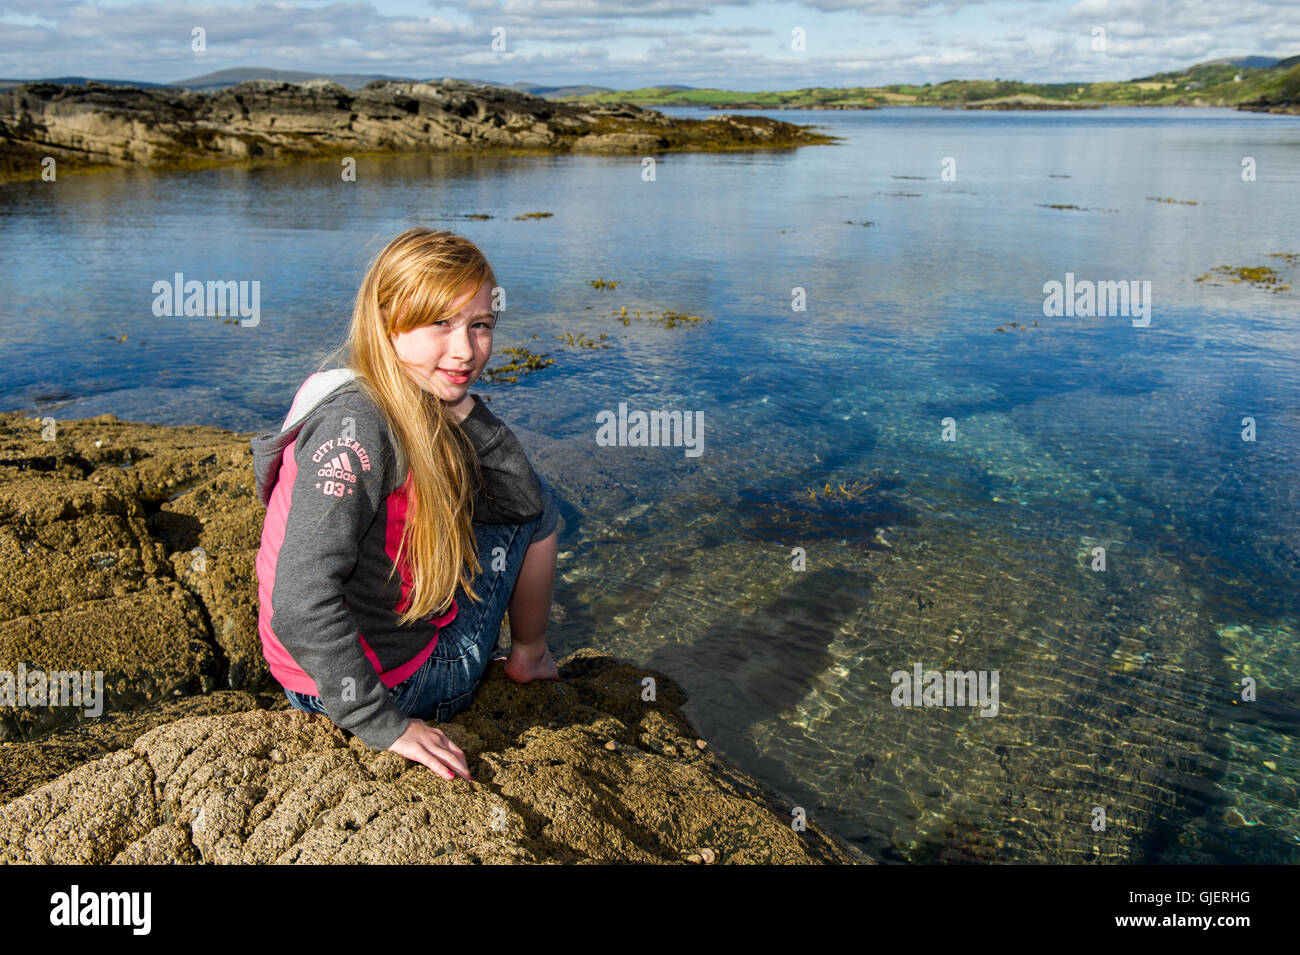 A beautiful 9 year old girl sitting on rocks by the sea in West Cork, Ireland with copy space. Stock Photo